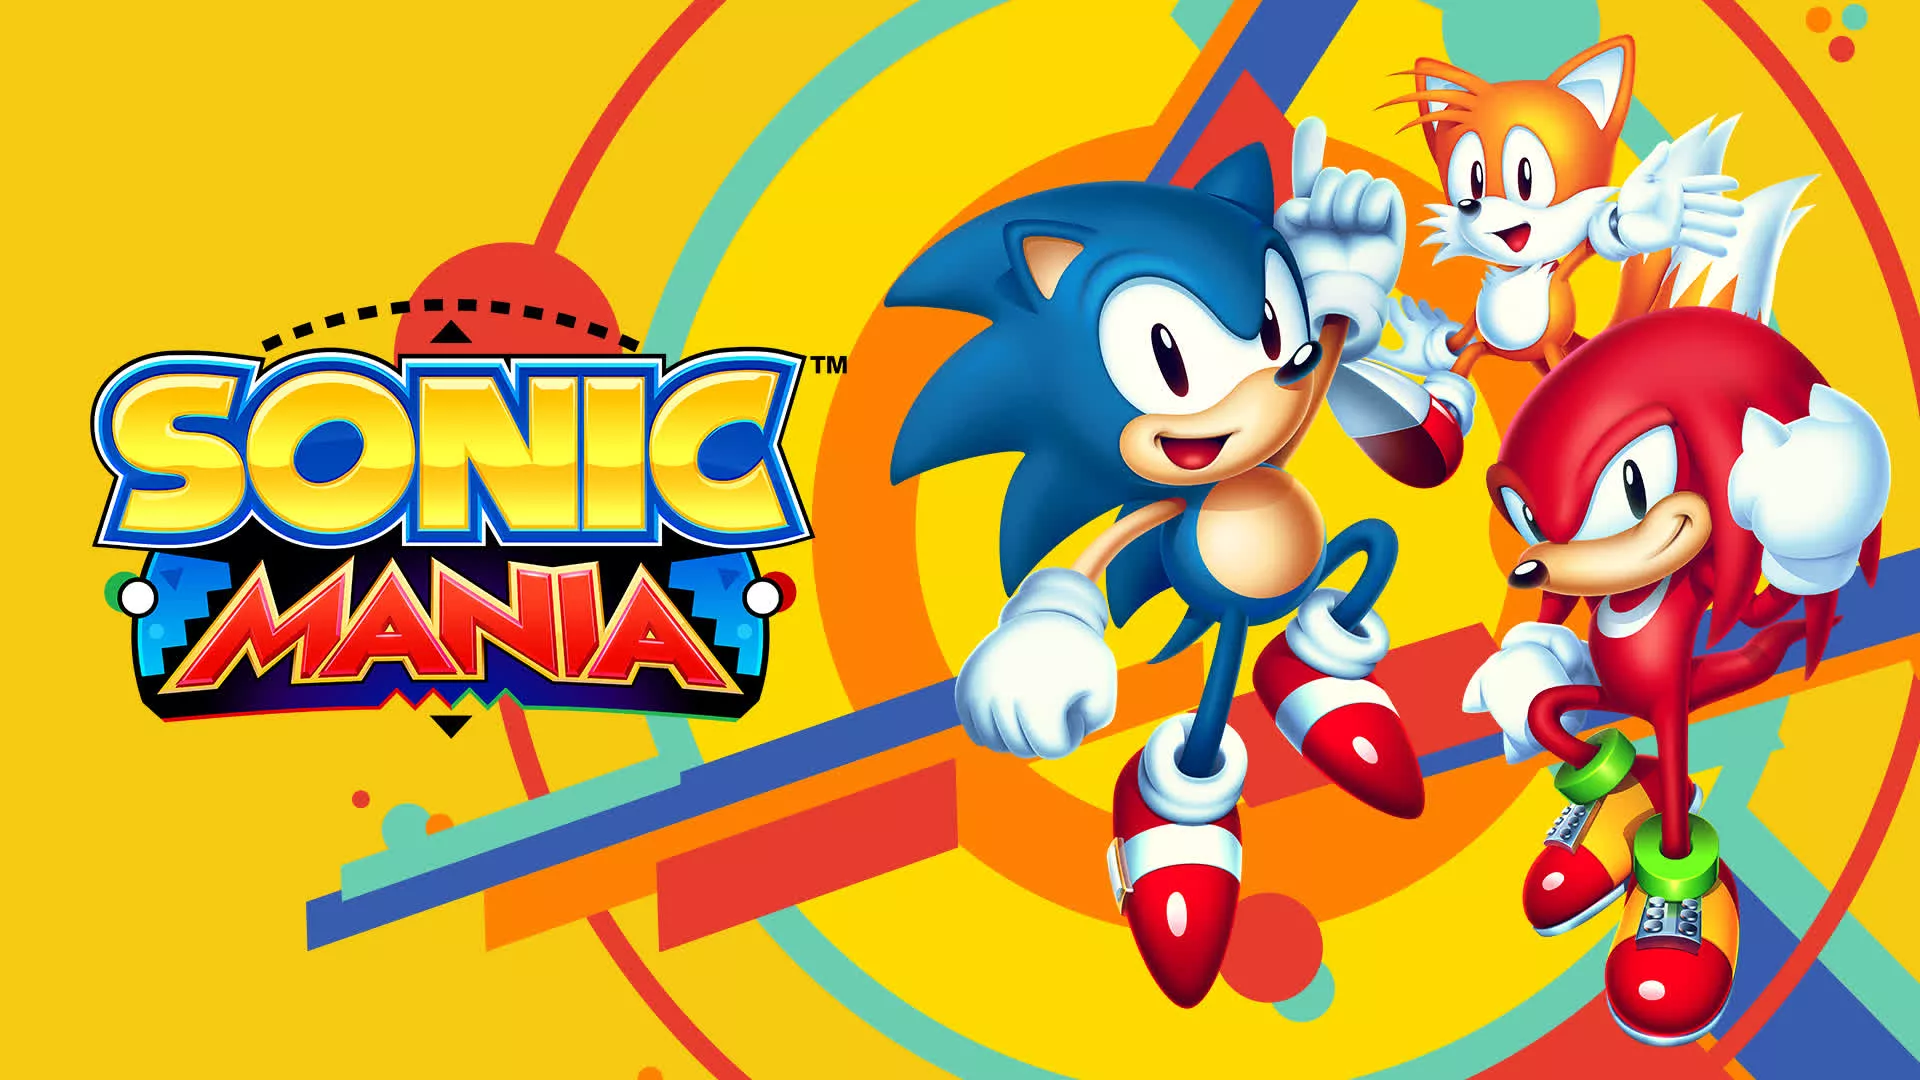 Epic is celebrating Sonic's 30th anniversary with a free copy of Sonic Mania